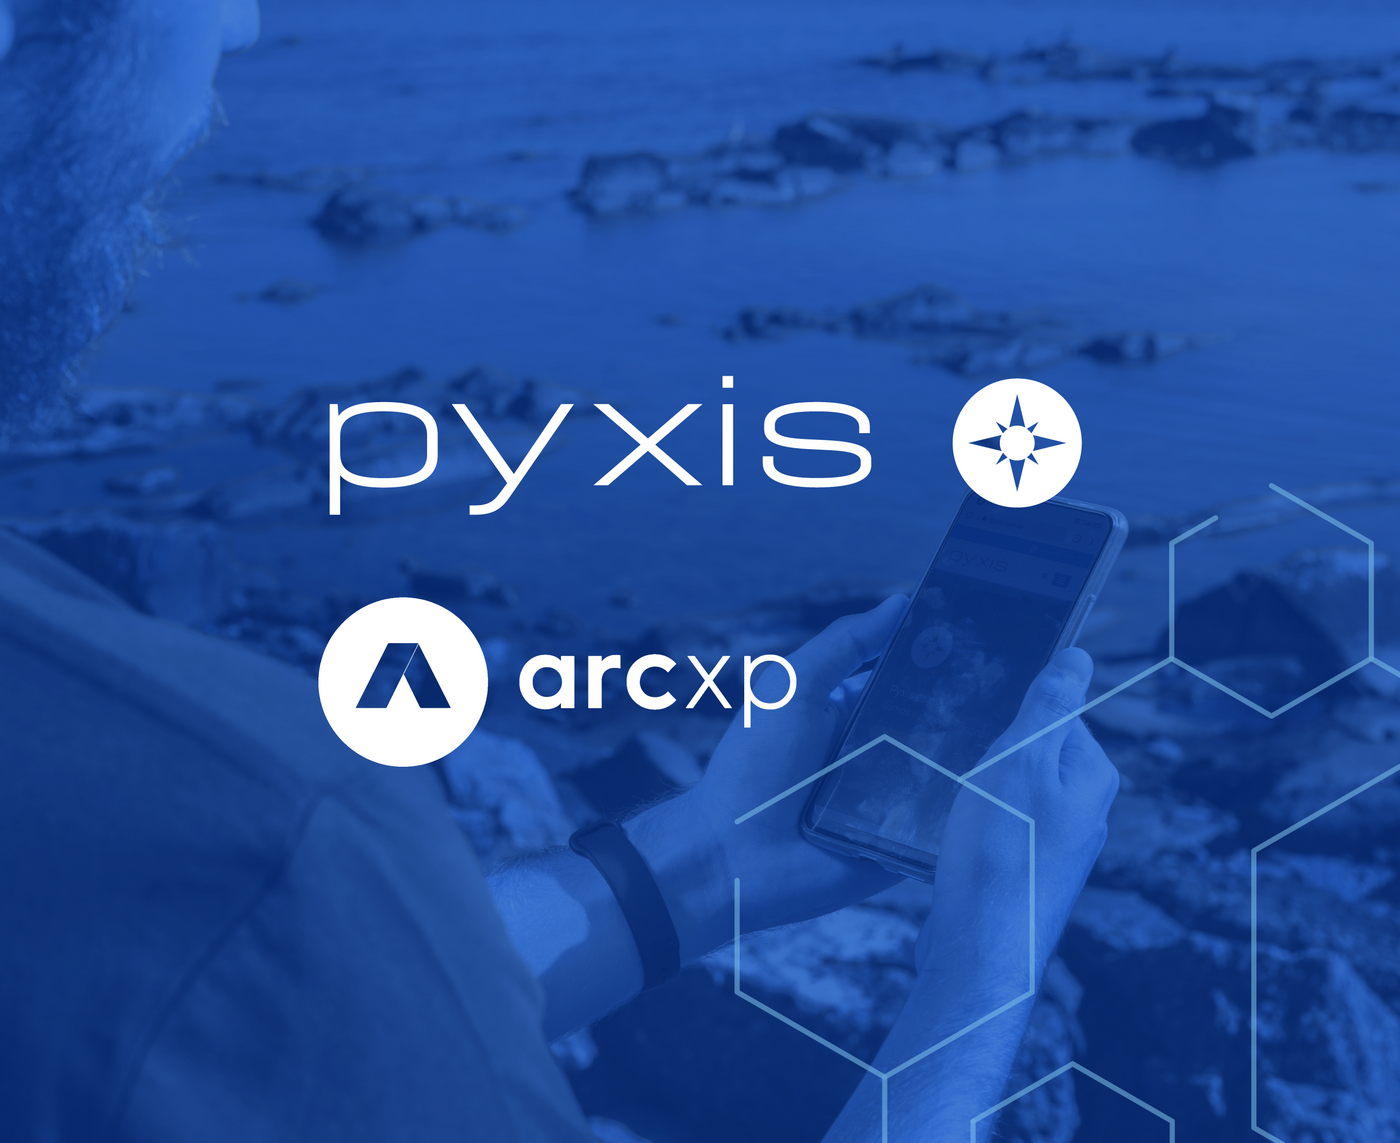 A Trusted Partner of Arc XP